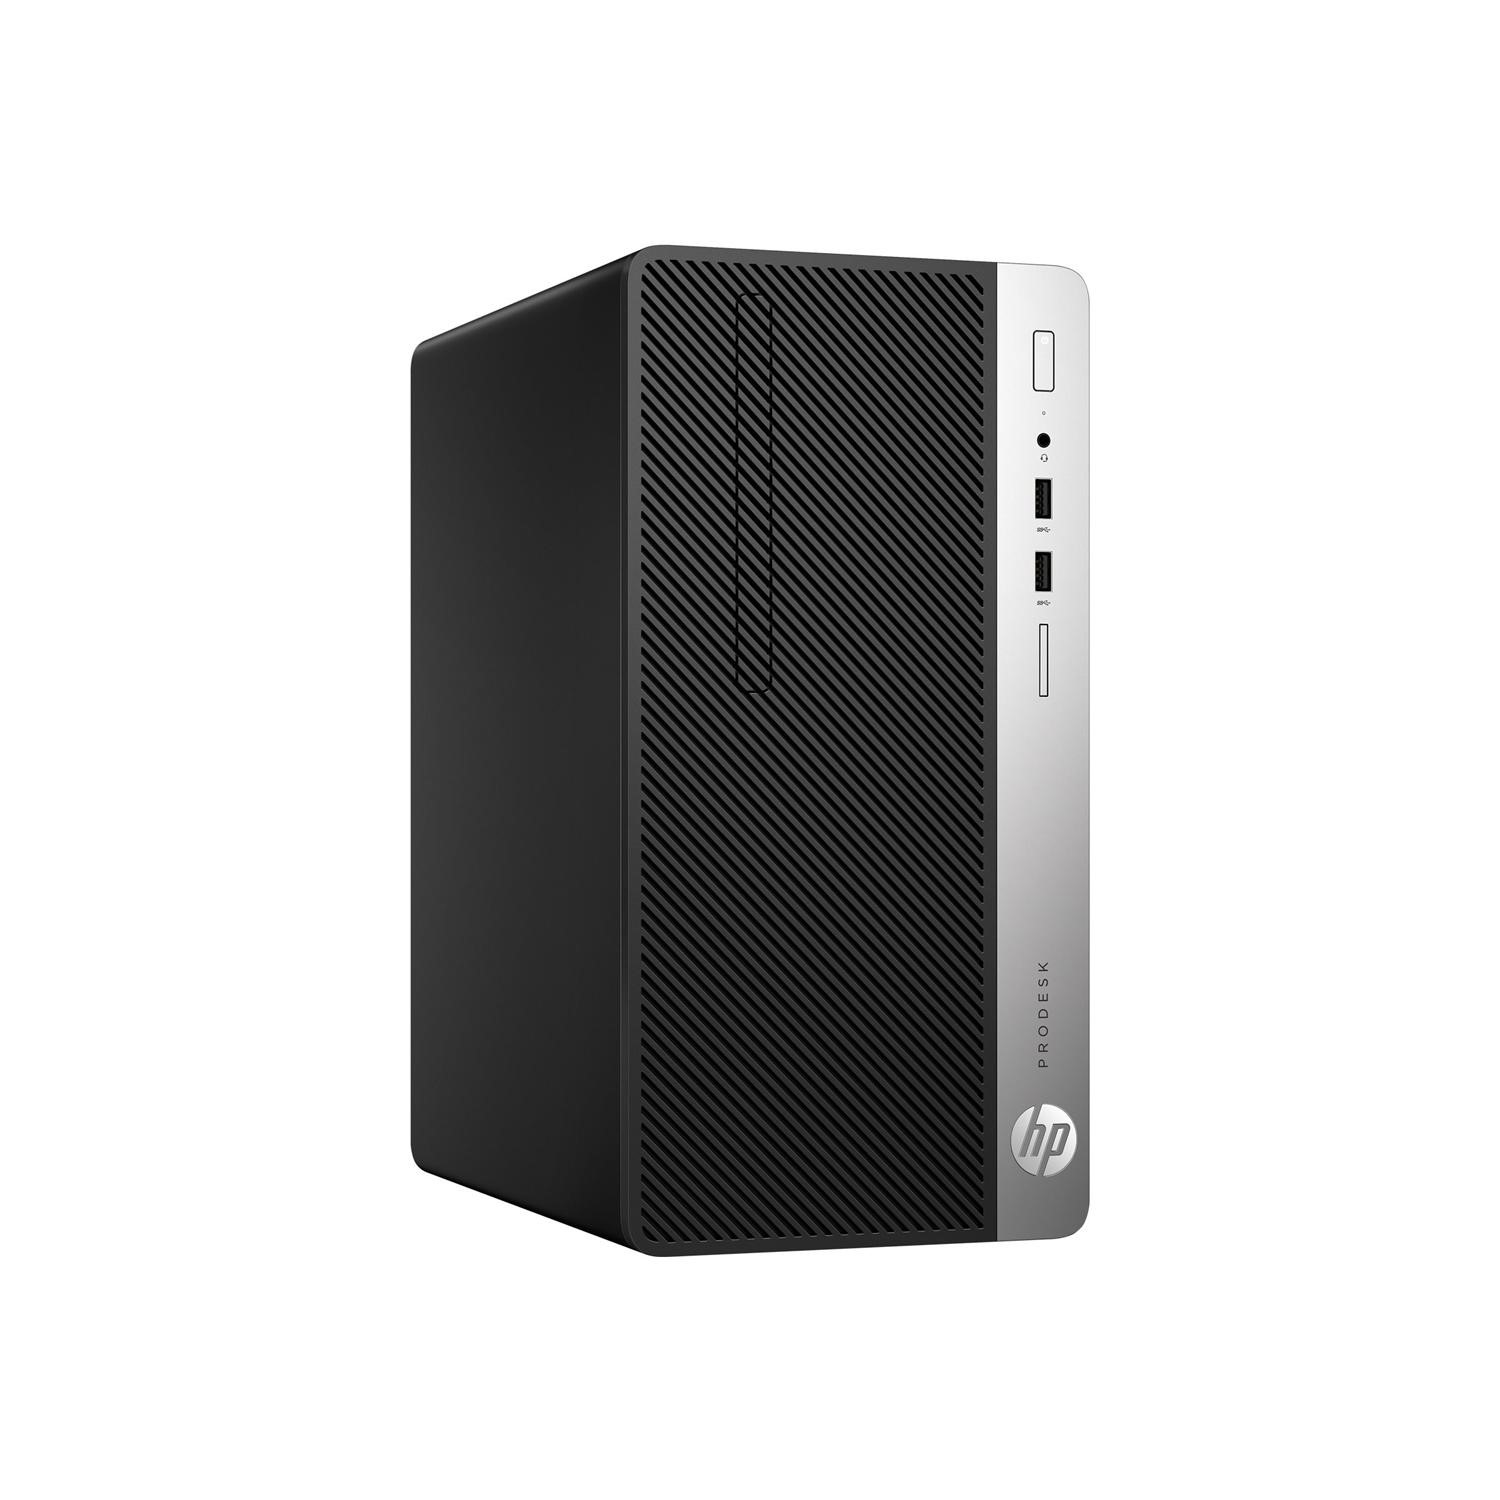 HP ProDesk 400 G4 Small Form Factor Business PC Product